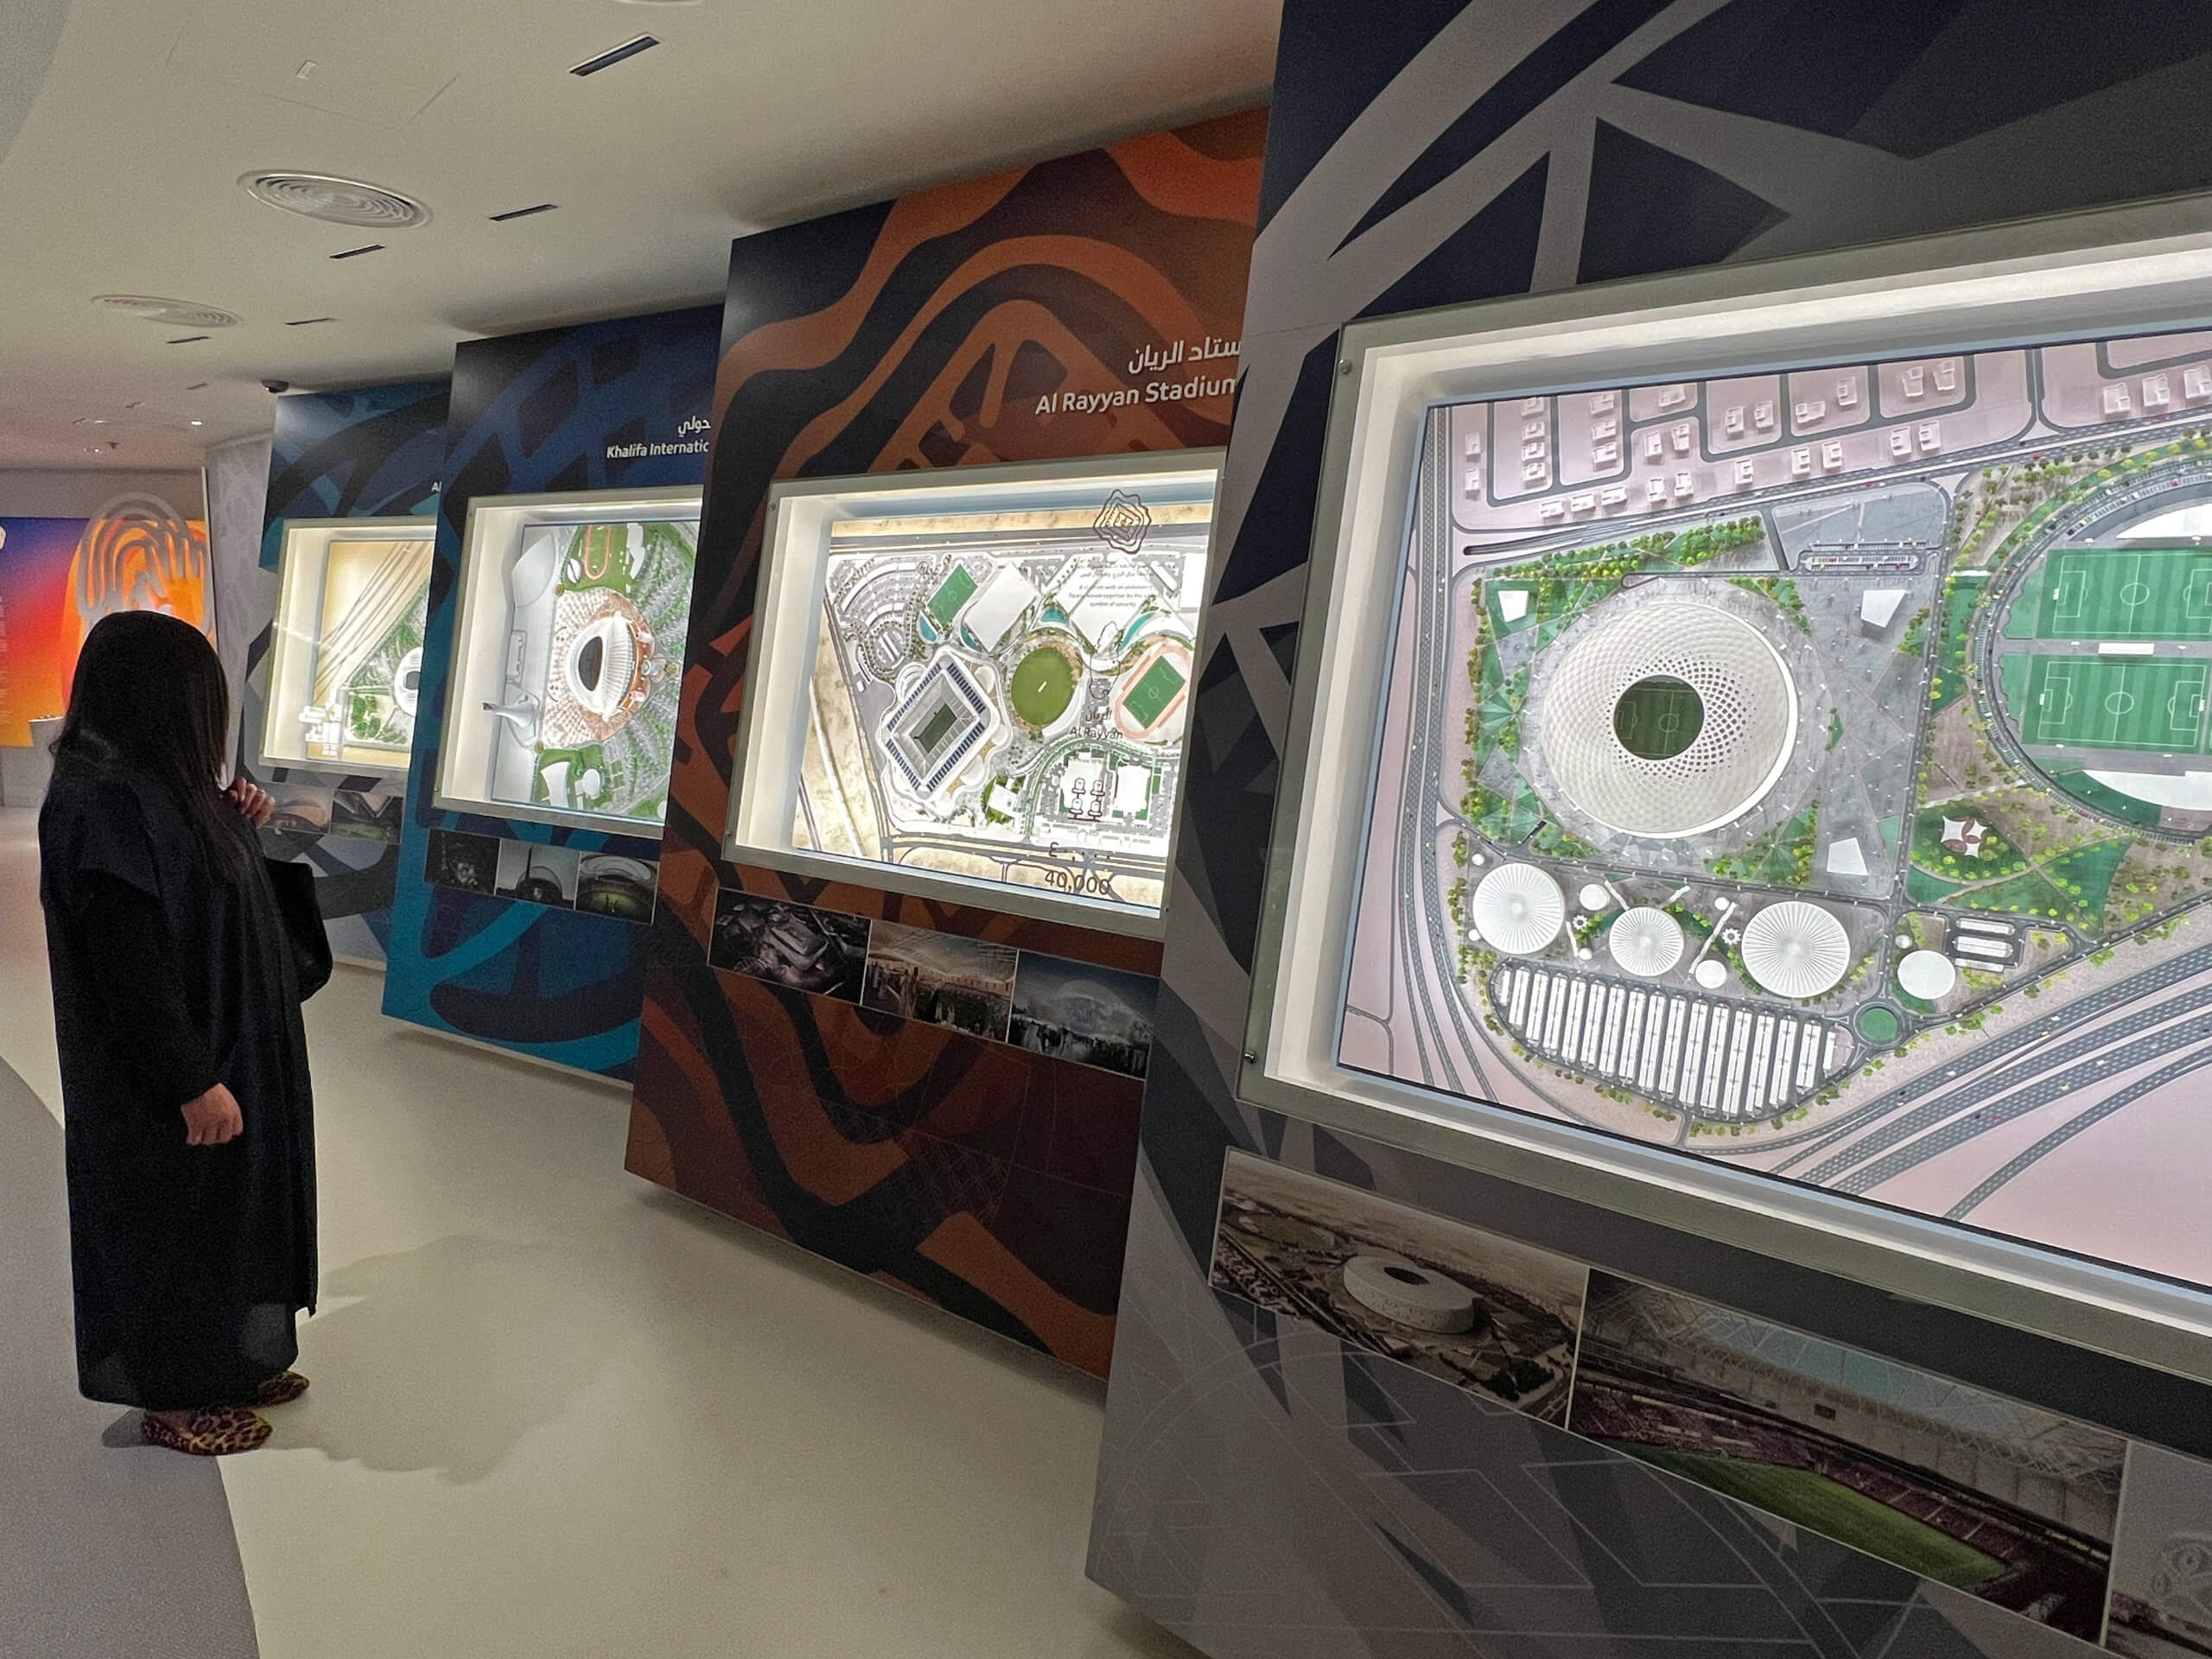 A delegate viewing the various stadium designs for the 2022 FIFA World Cup in Qatar